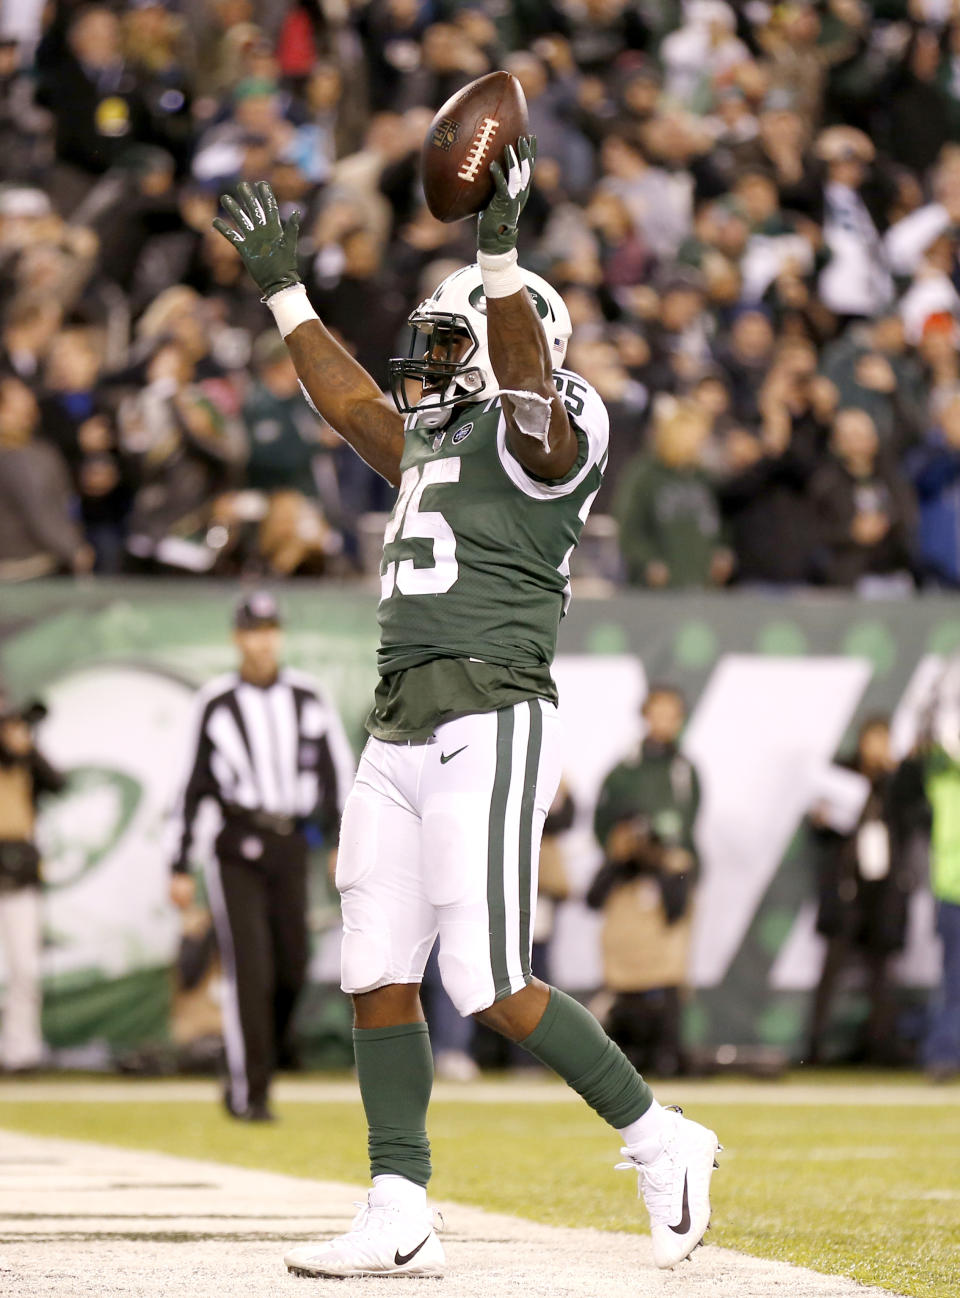 New York Jets running back Elijah McGuire celebrates his touchdown run against the Houston Texans during the second half of an NFL football game, Saturday, Dec. 15, 2018, in East Rutherford, N.J. (AP Photo/Adam Hunger)